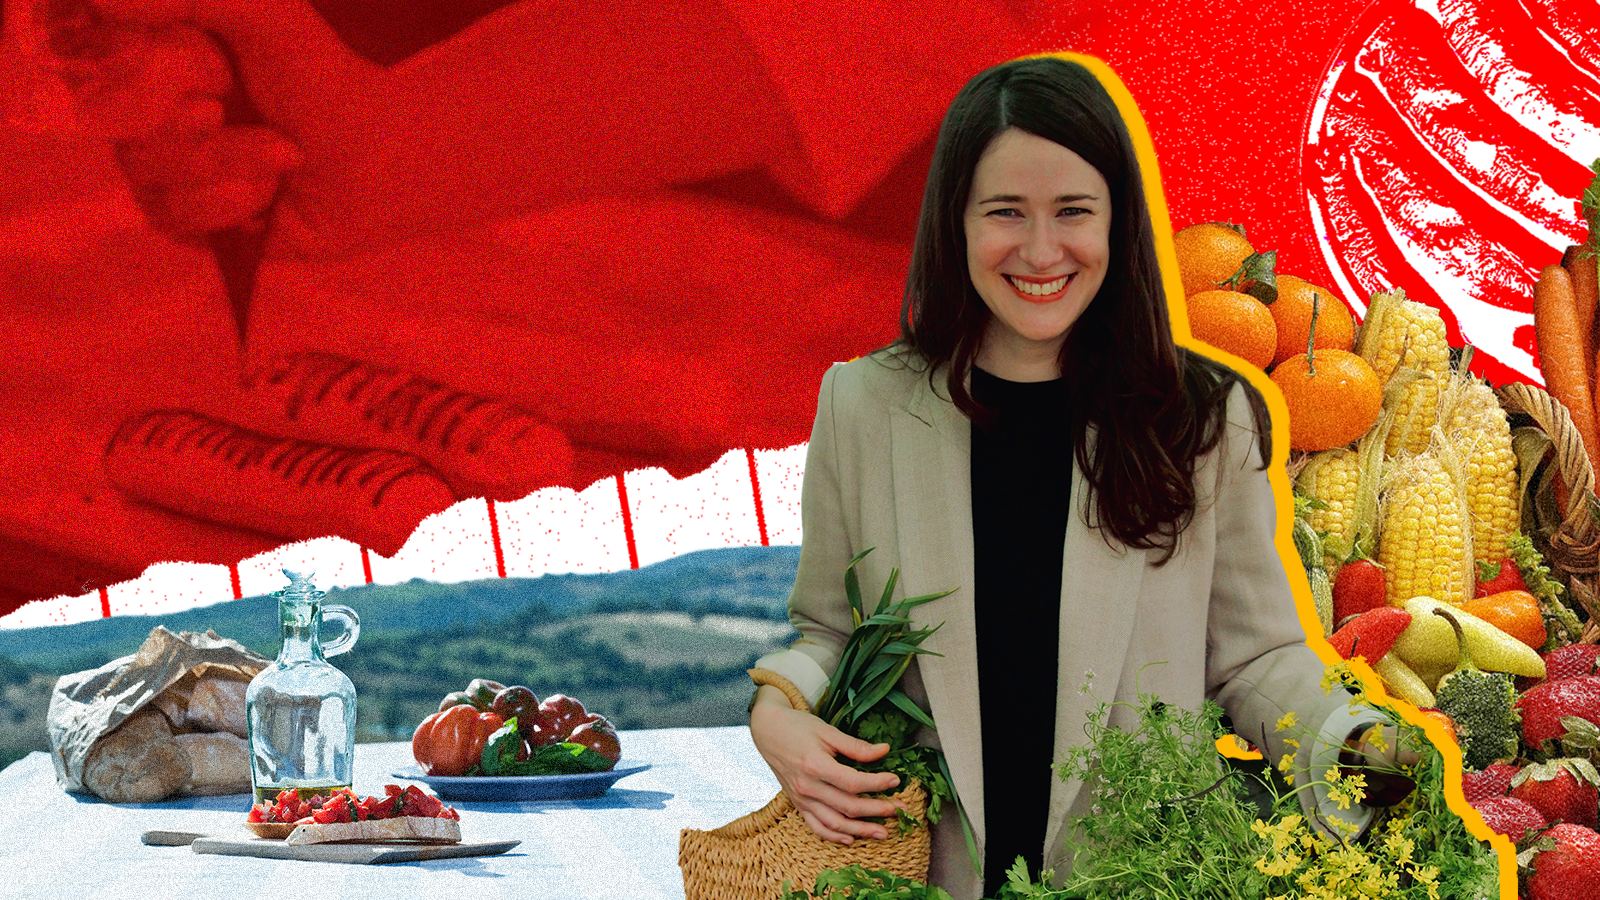 Photoillustration of Kat Craddock holding produce with a collage backdrop.